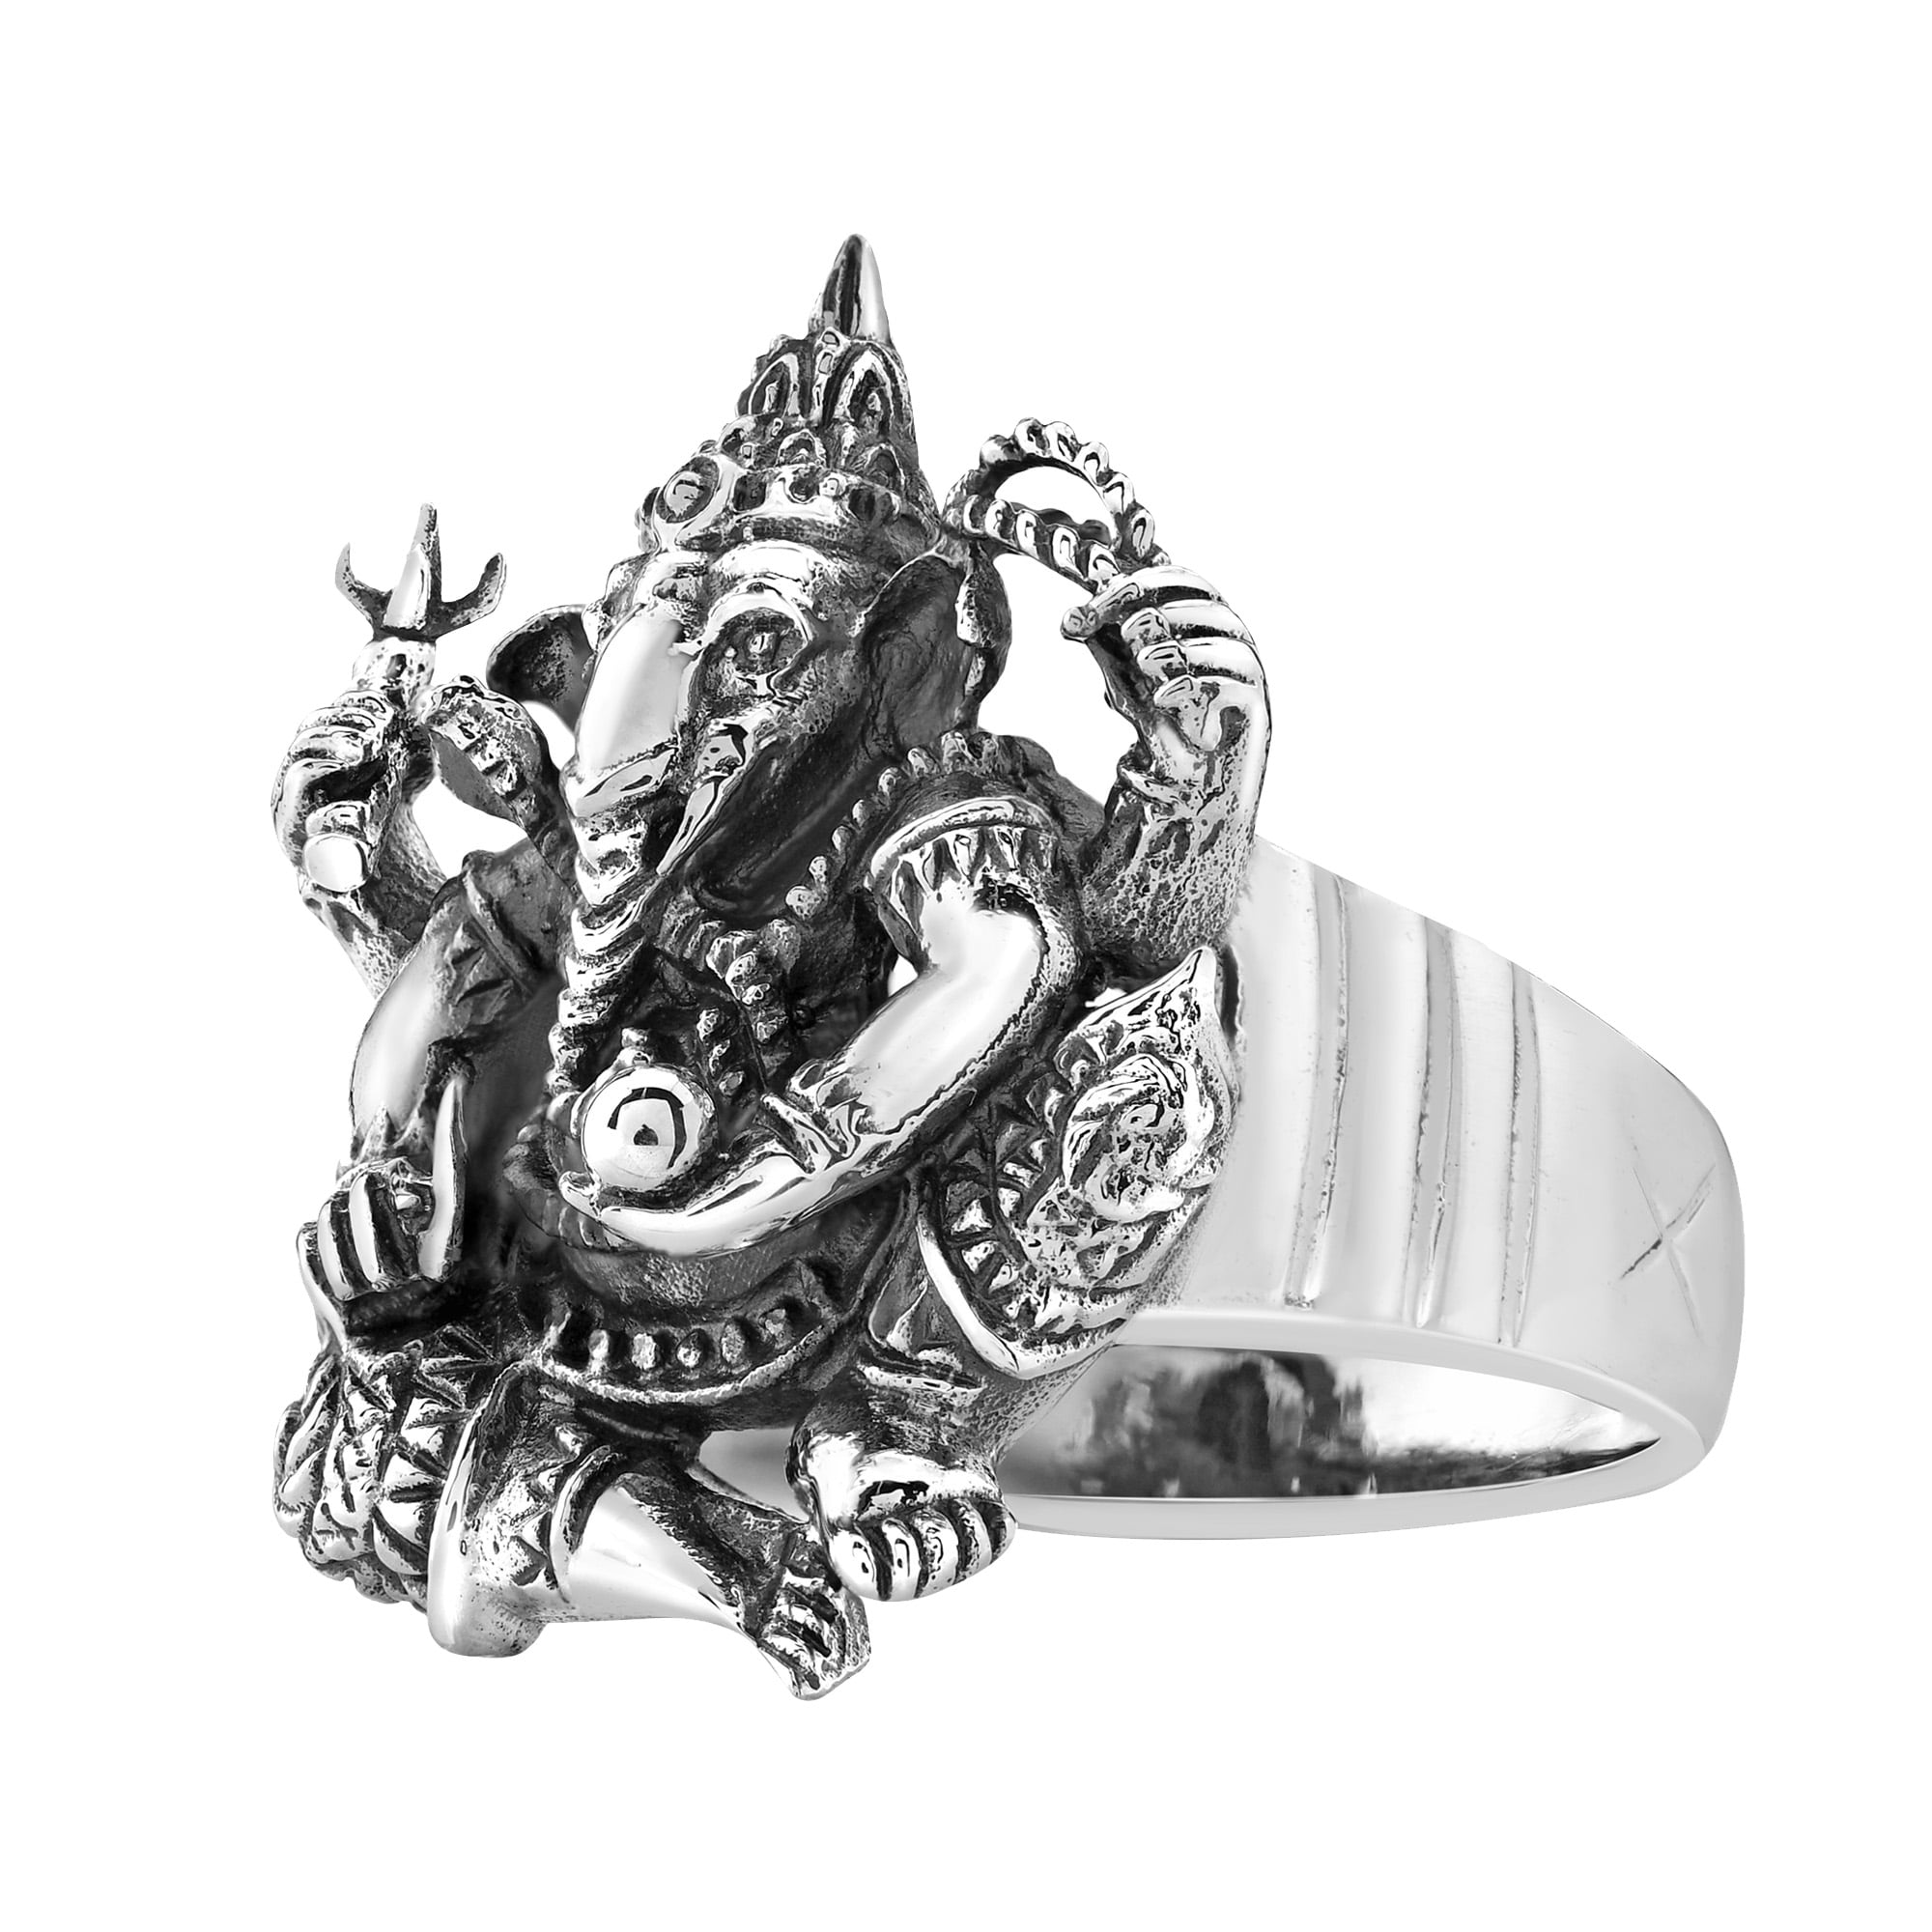 14K Lord Ganesha Gold Ring For You | PC Chandra